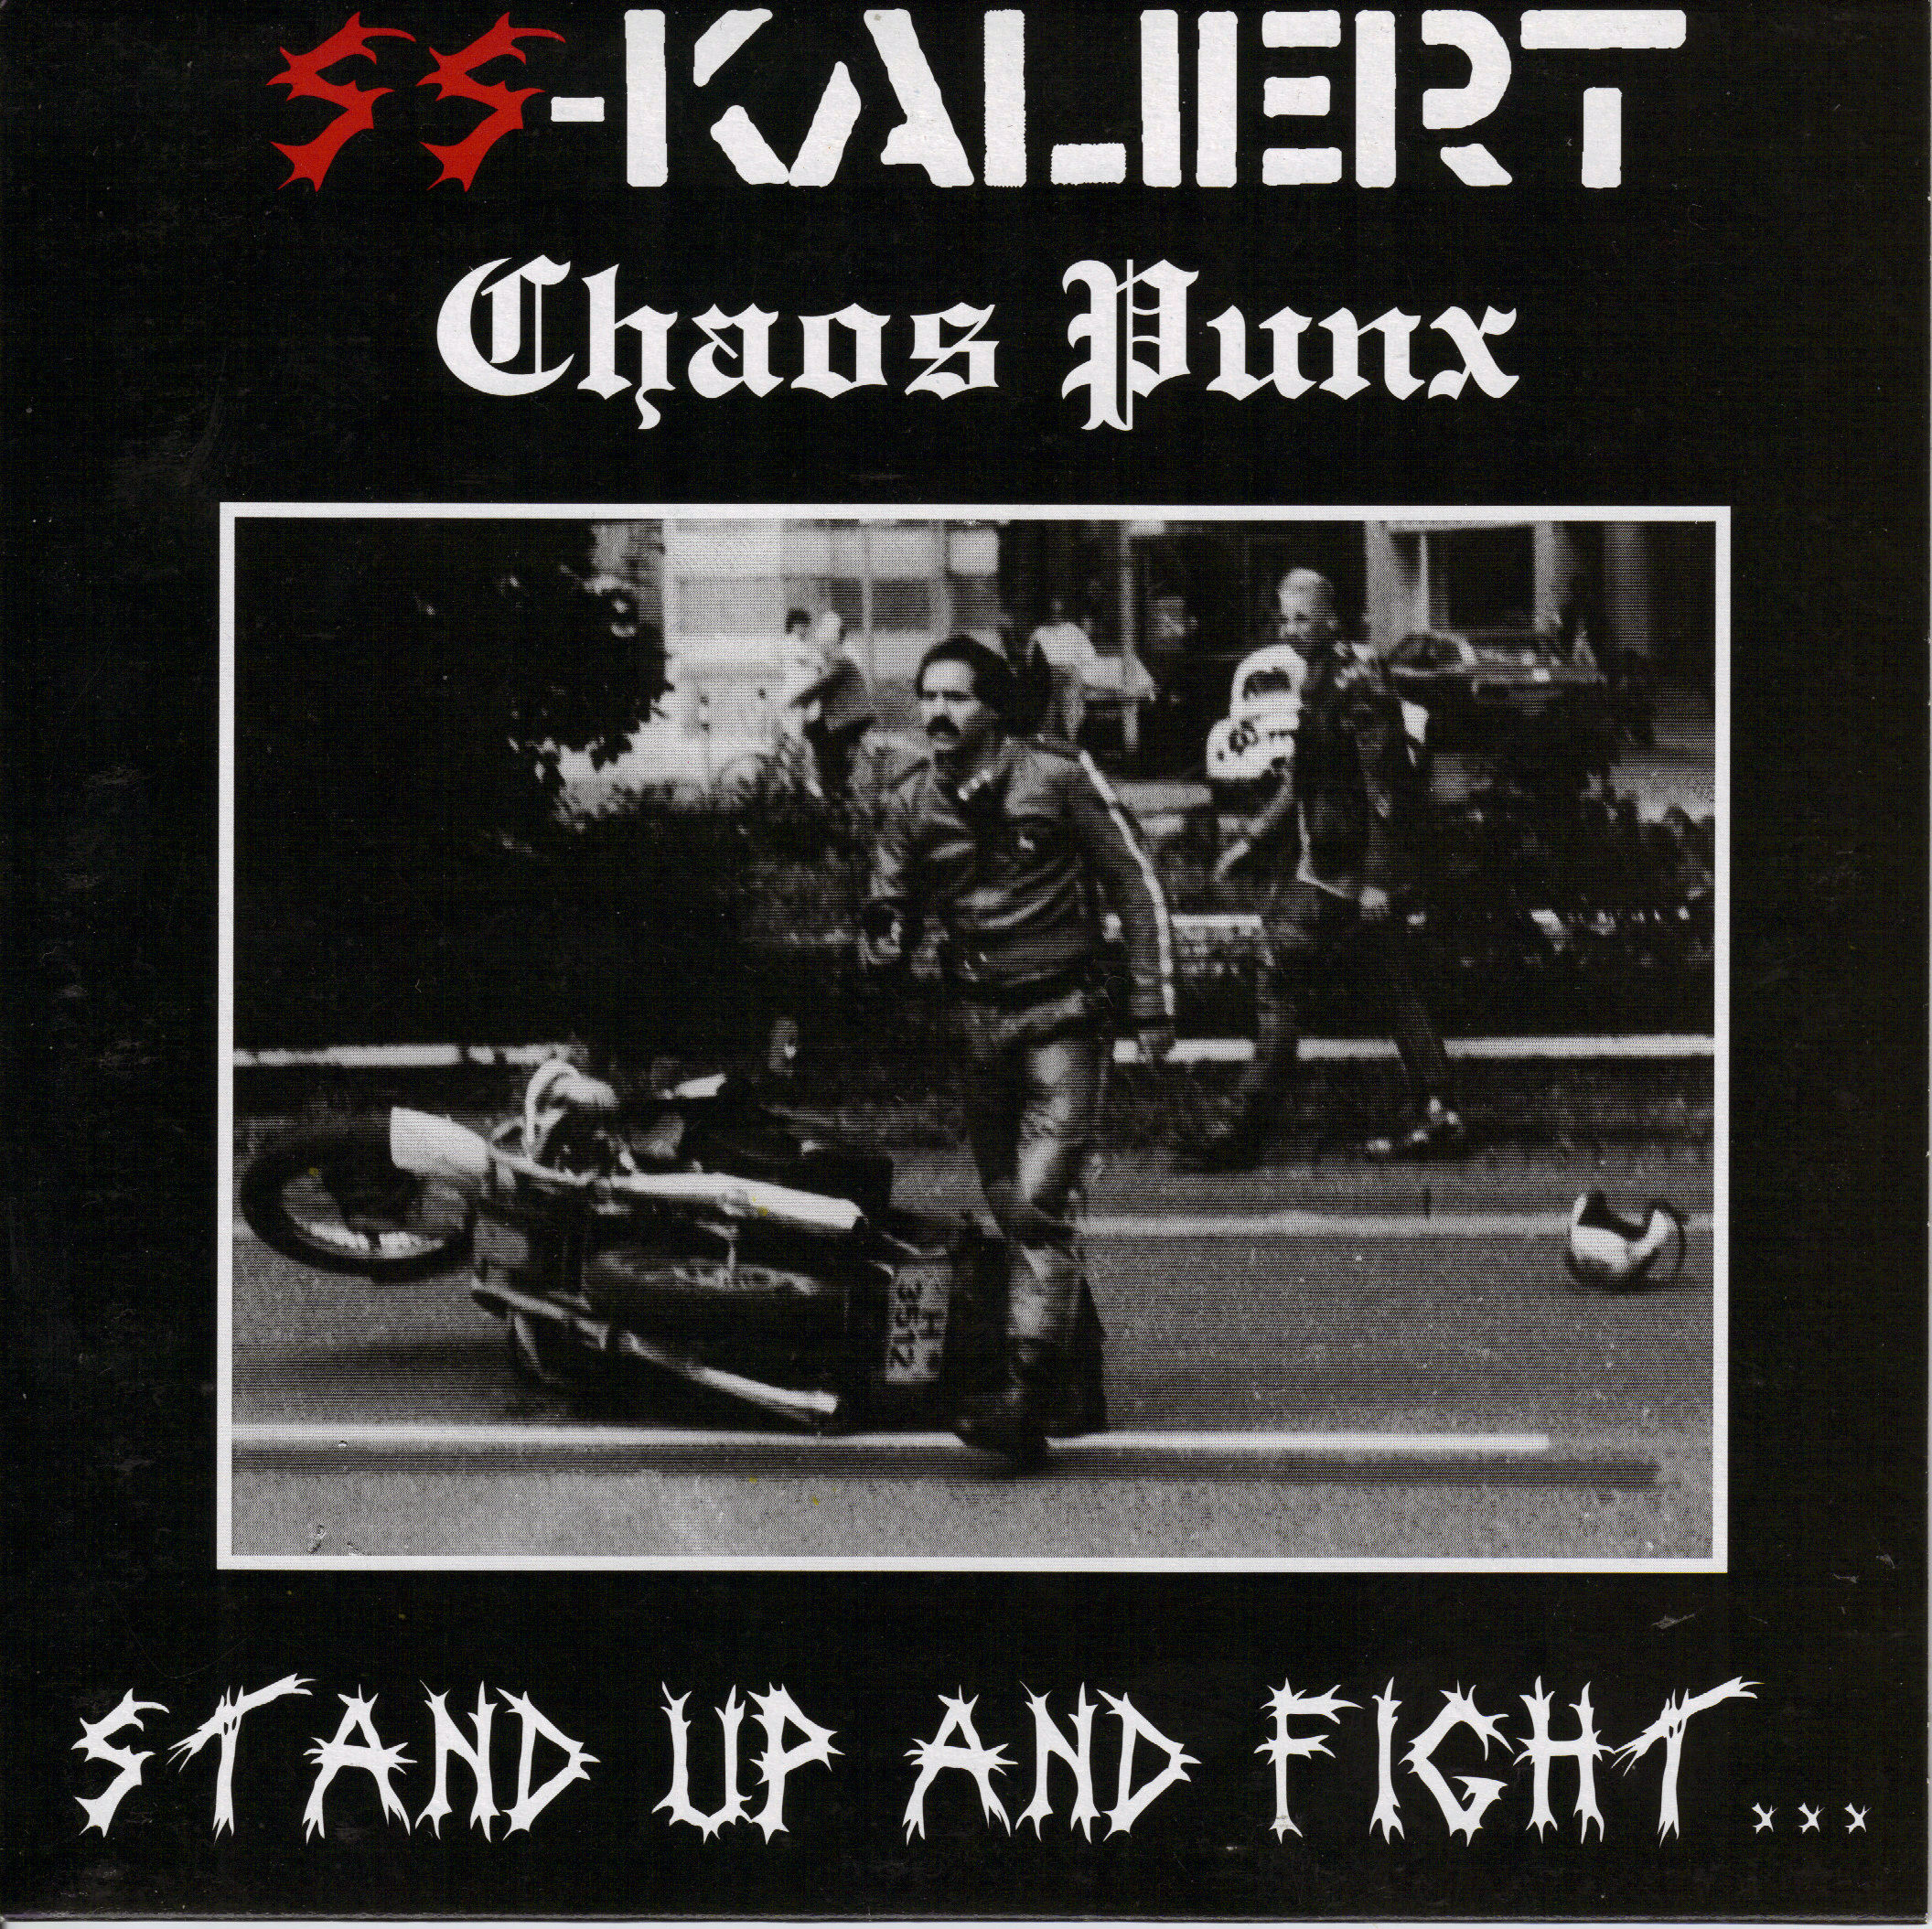 SS-Kaliert - Stand Up And Fight...7 - Front.jpg